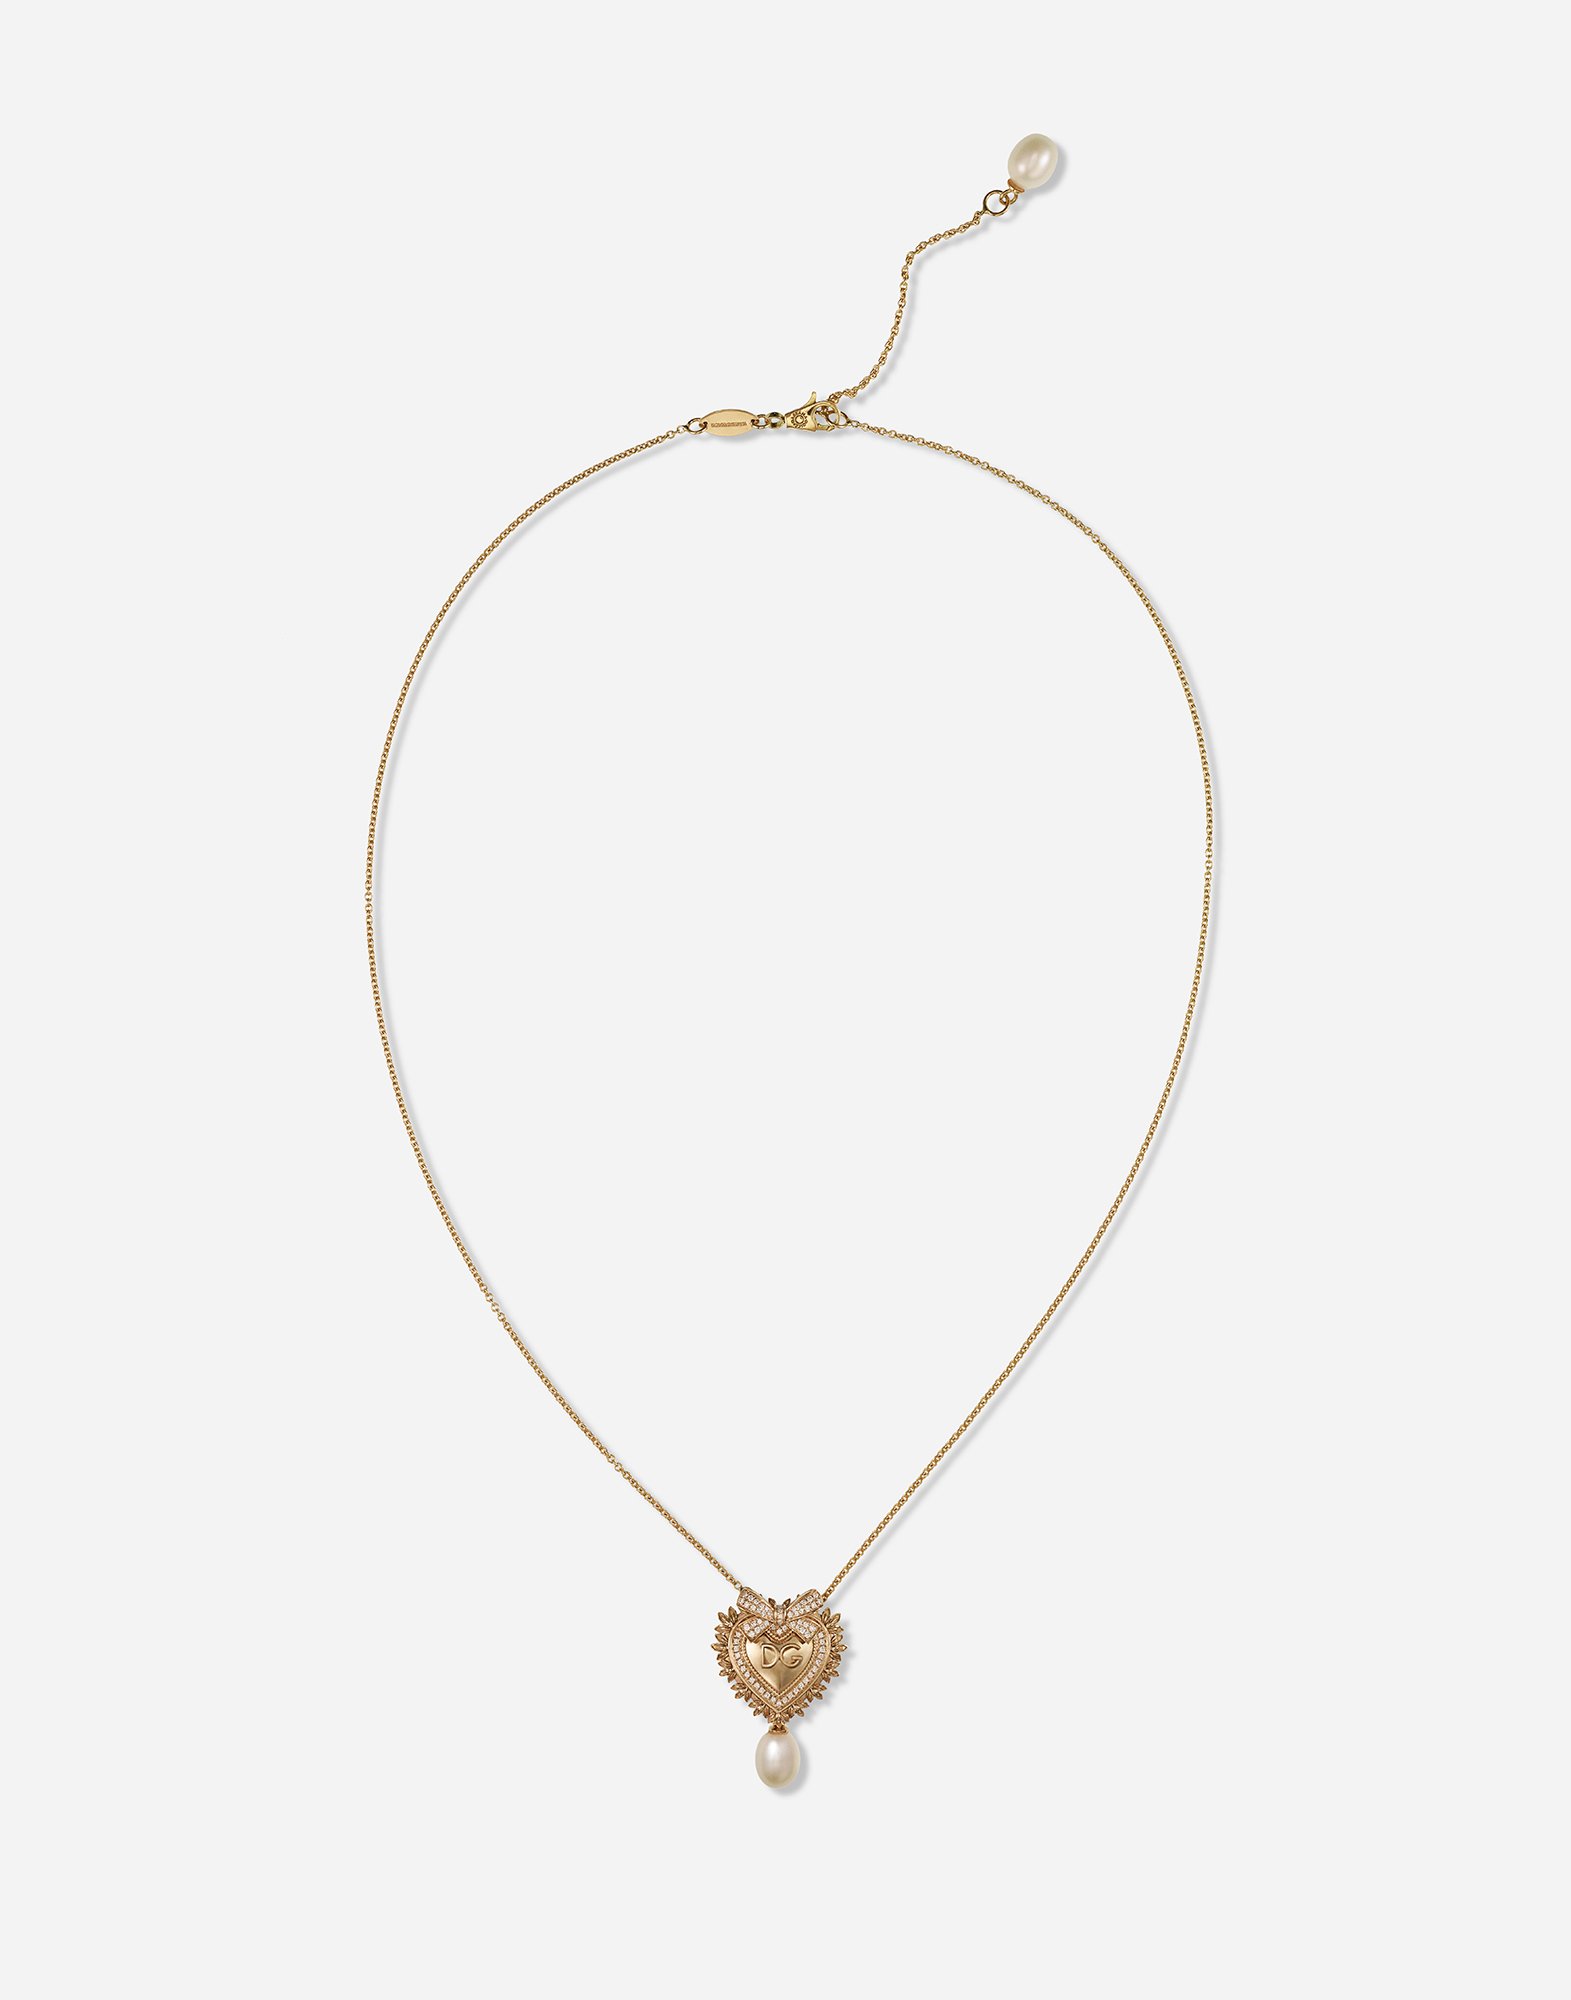 Devotion necklace in yellow gold with 